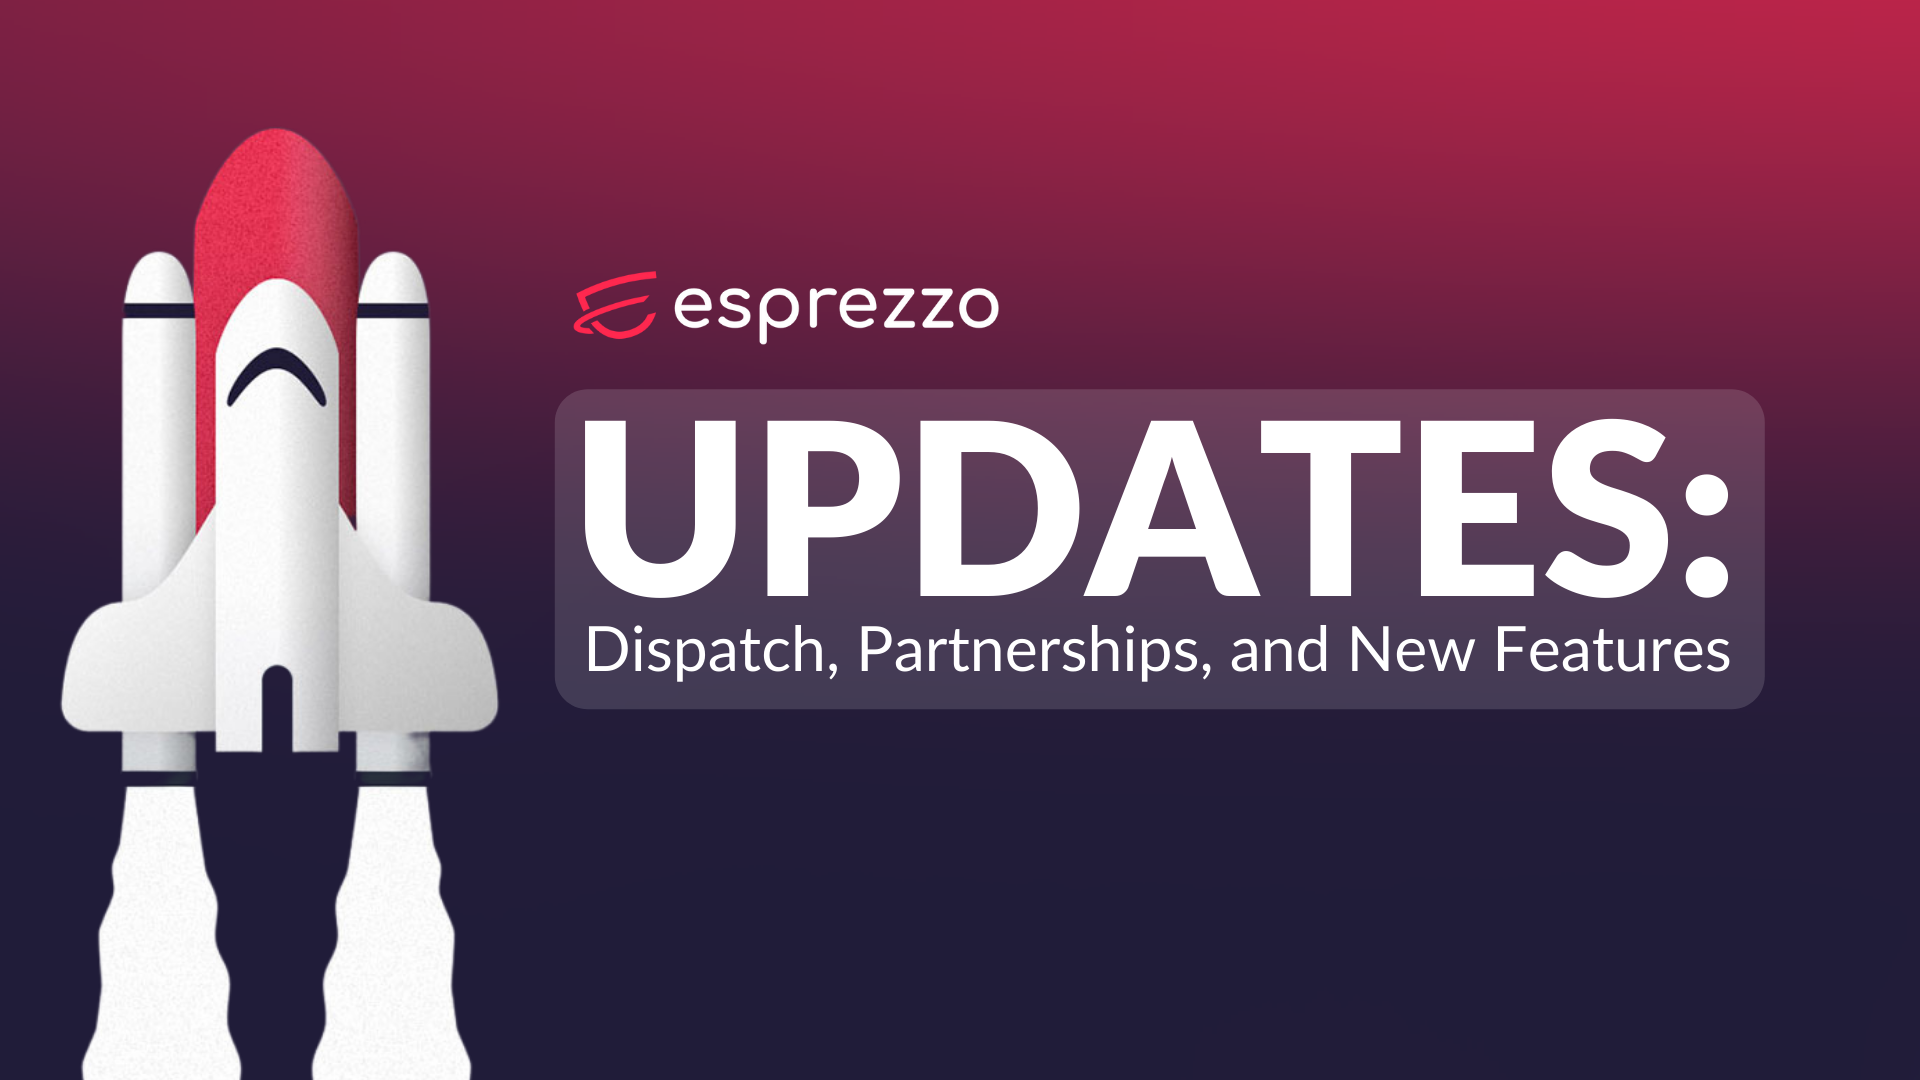 graphic showing a rocket with the Esprezzo logo and text reading "Updates: Dispatch, partnerships and new features"